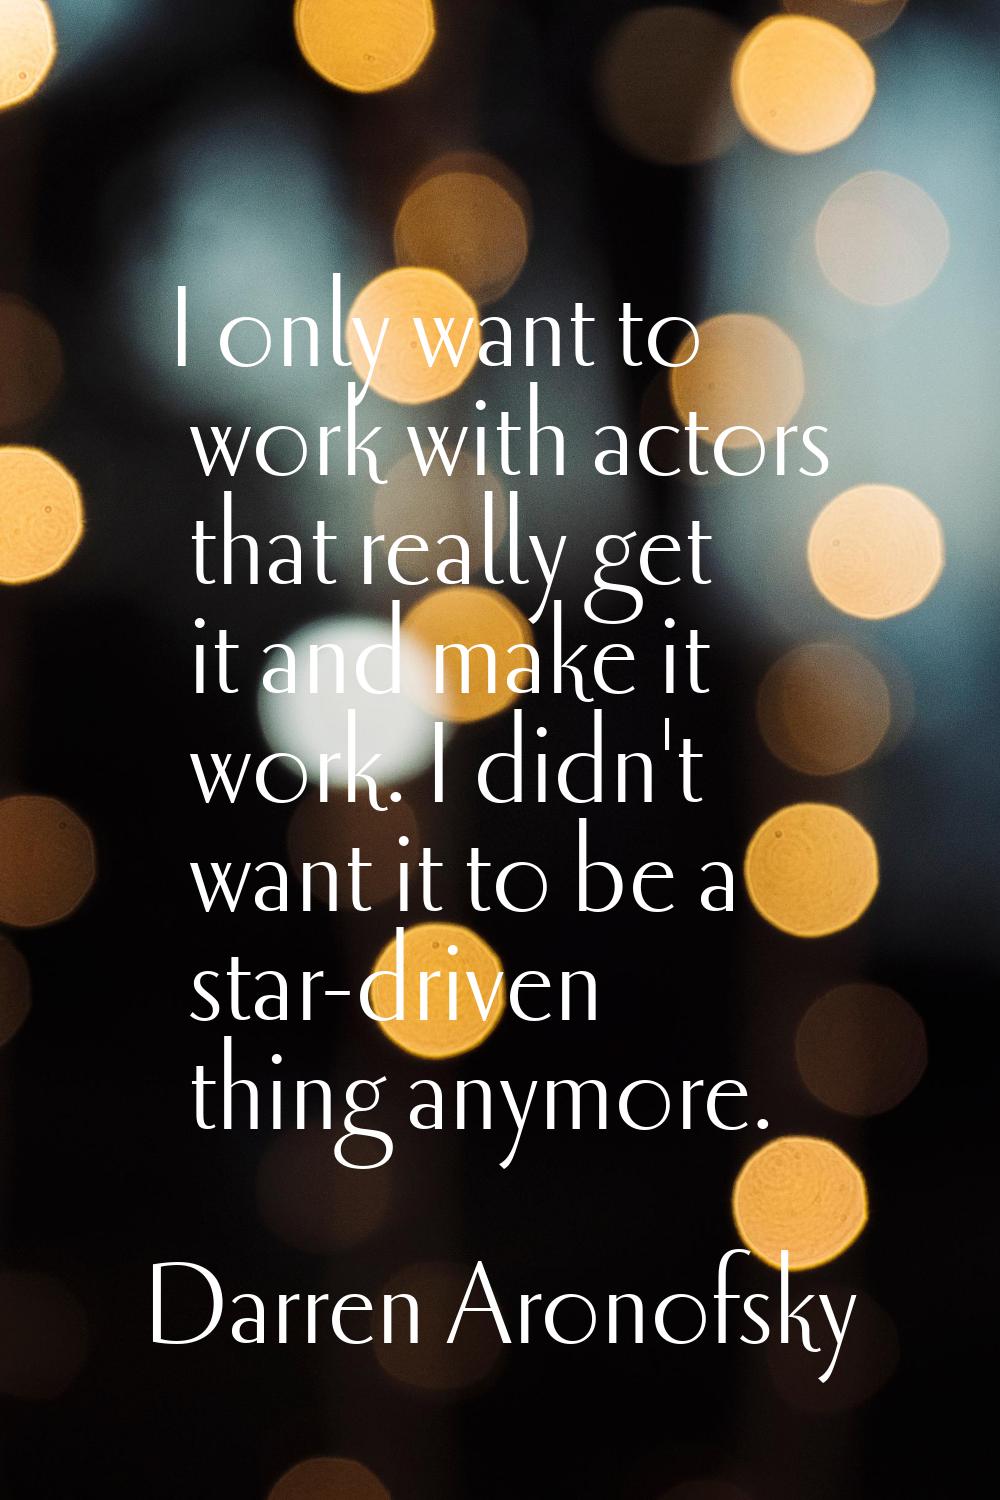 I only want to work with actors that really get it and make it work. I didn't want it to be a star-